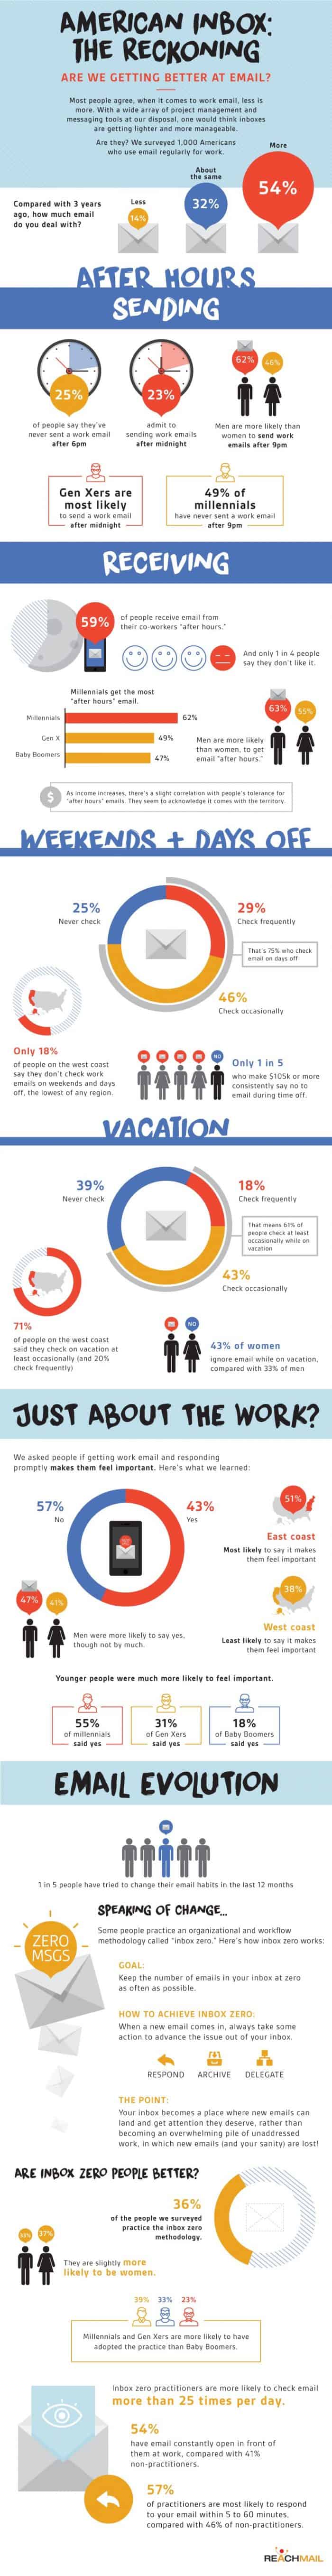 Infographic showing some interesting stats about how people handle their work-related emails.